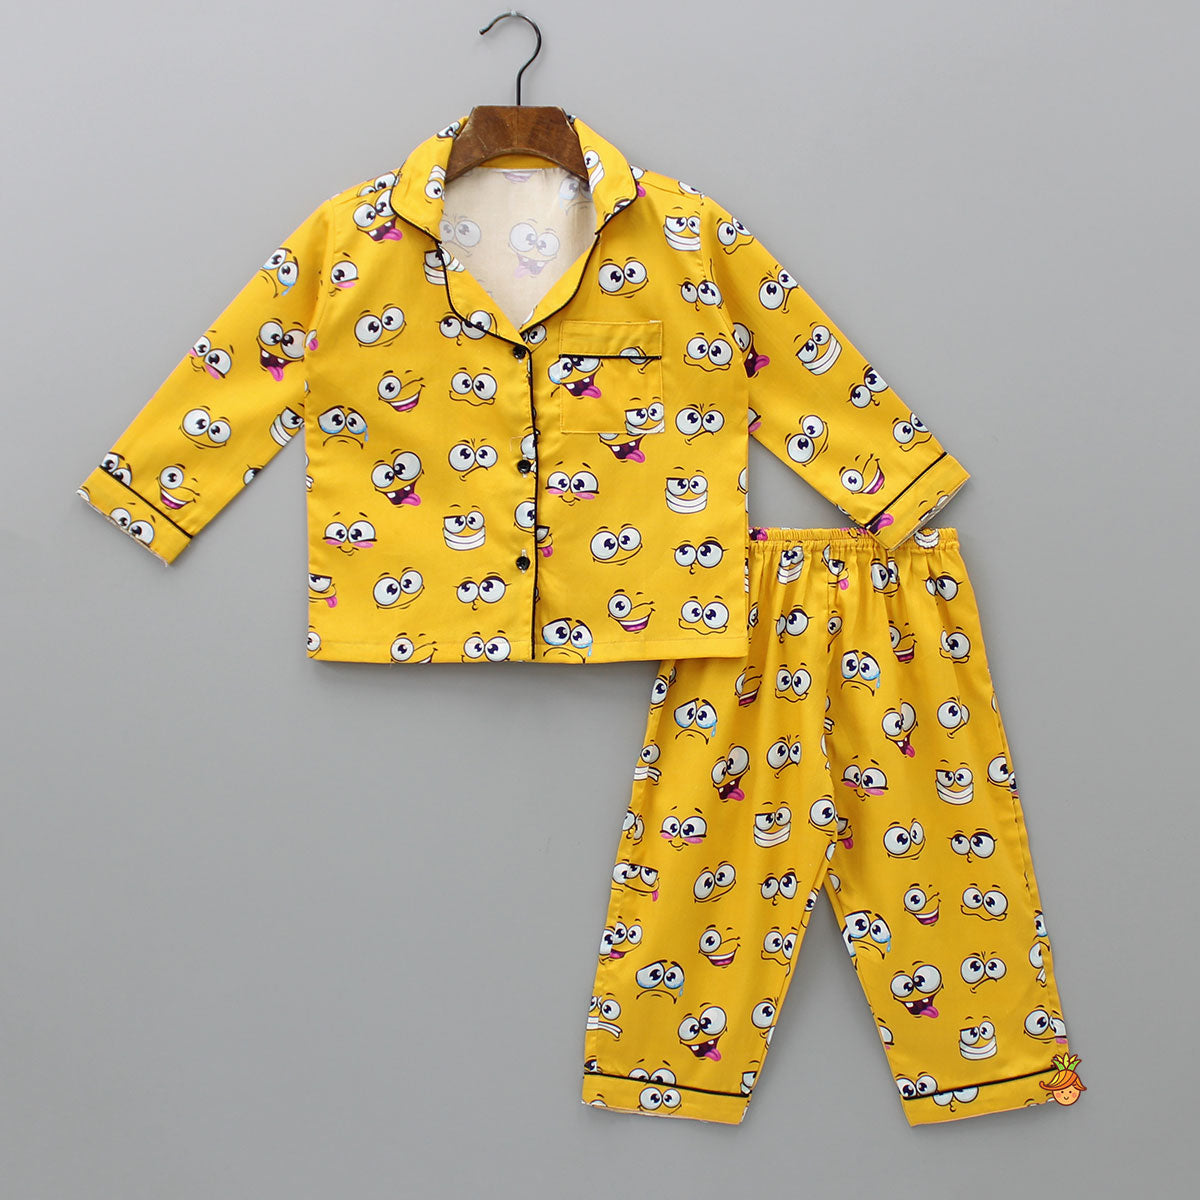 Facial Expressions Printed Pure Cotton Mustard Yellow Sleepwear